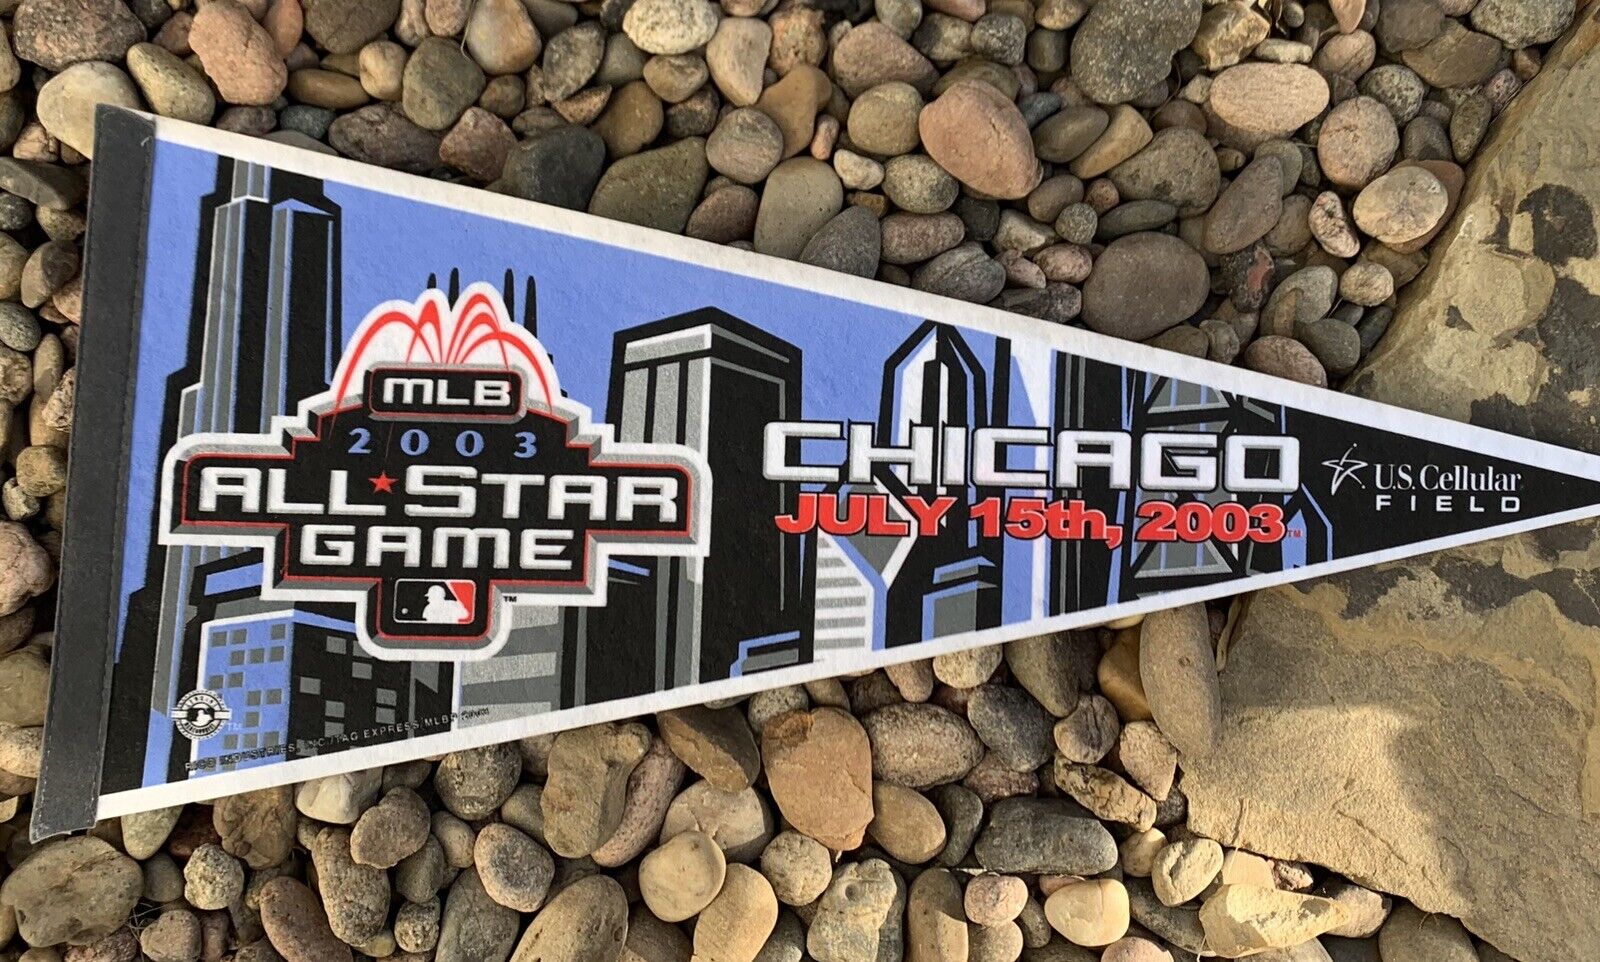 MLB 2003 All Star Game Pennant. Chicago White Sox. Good Condition 